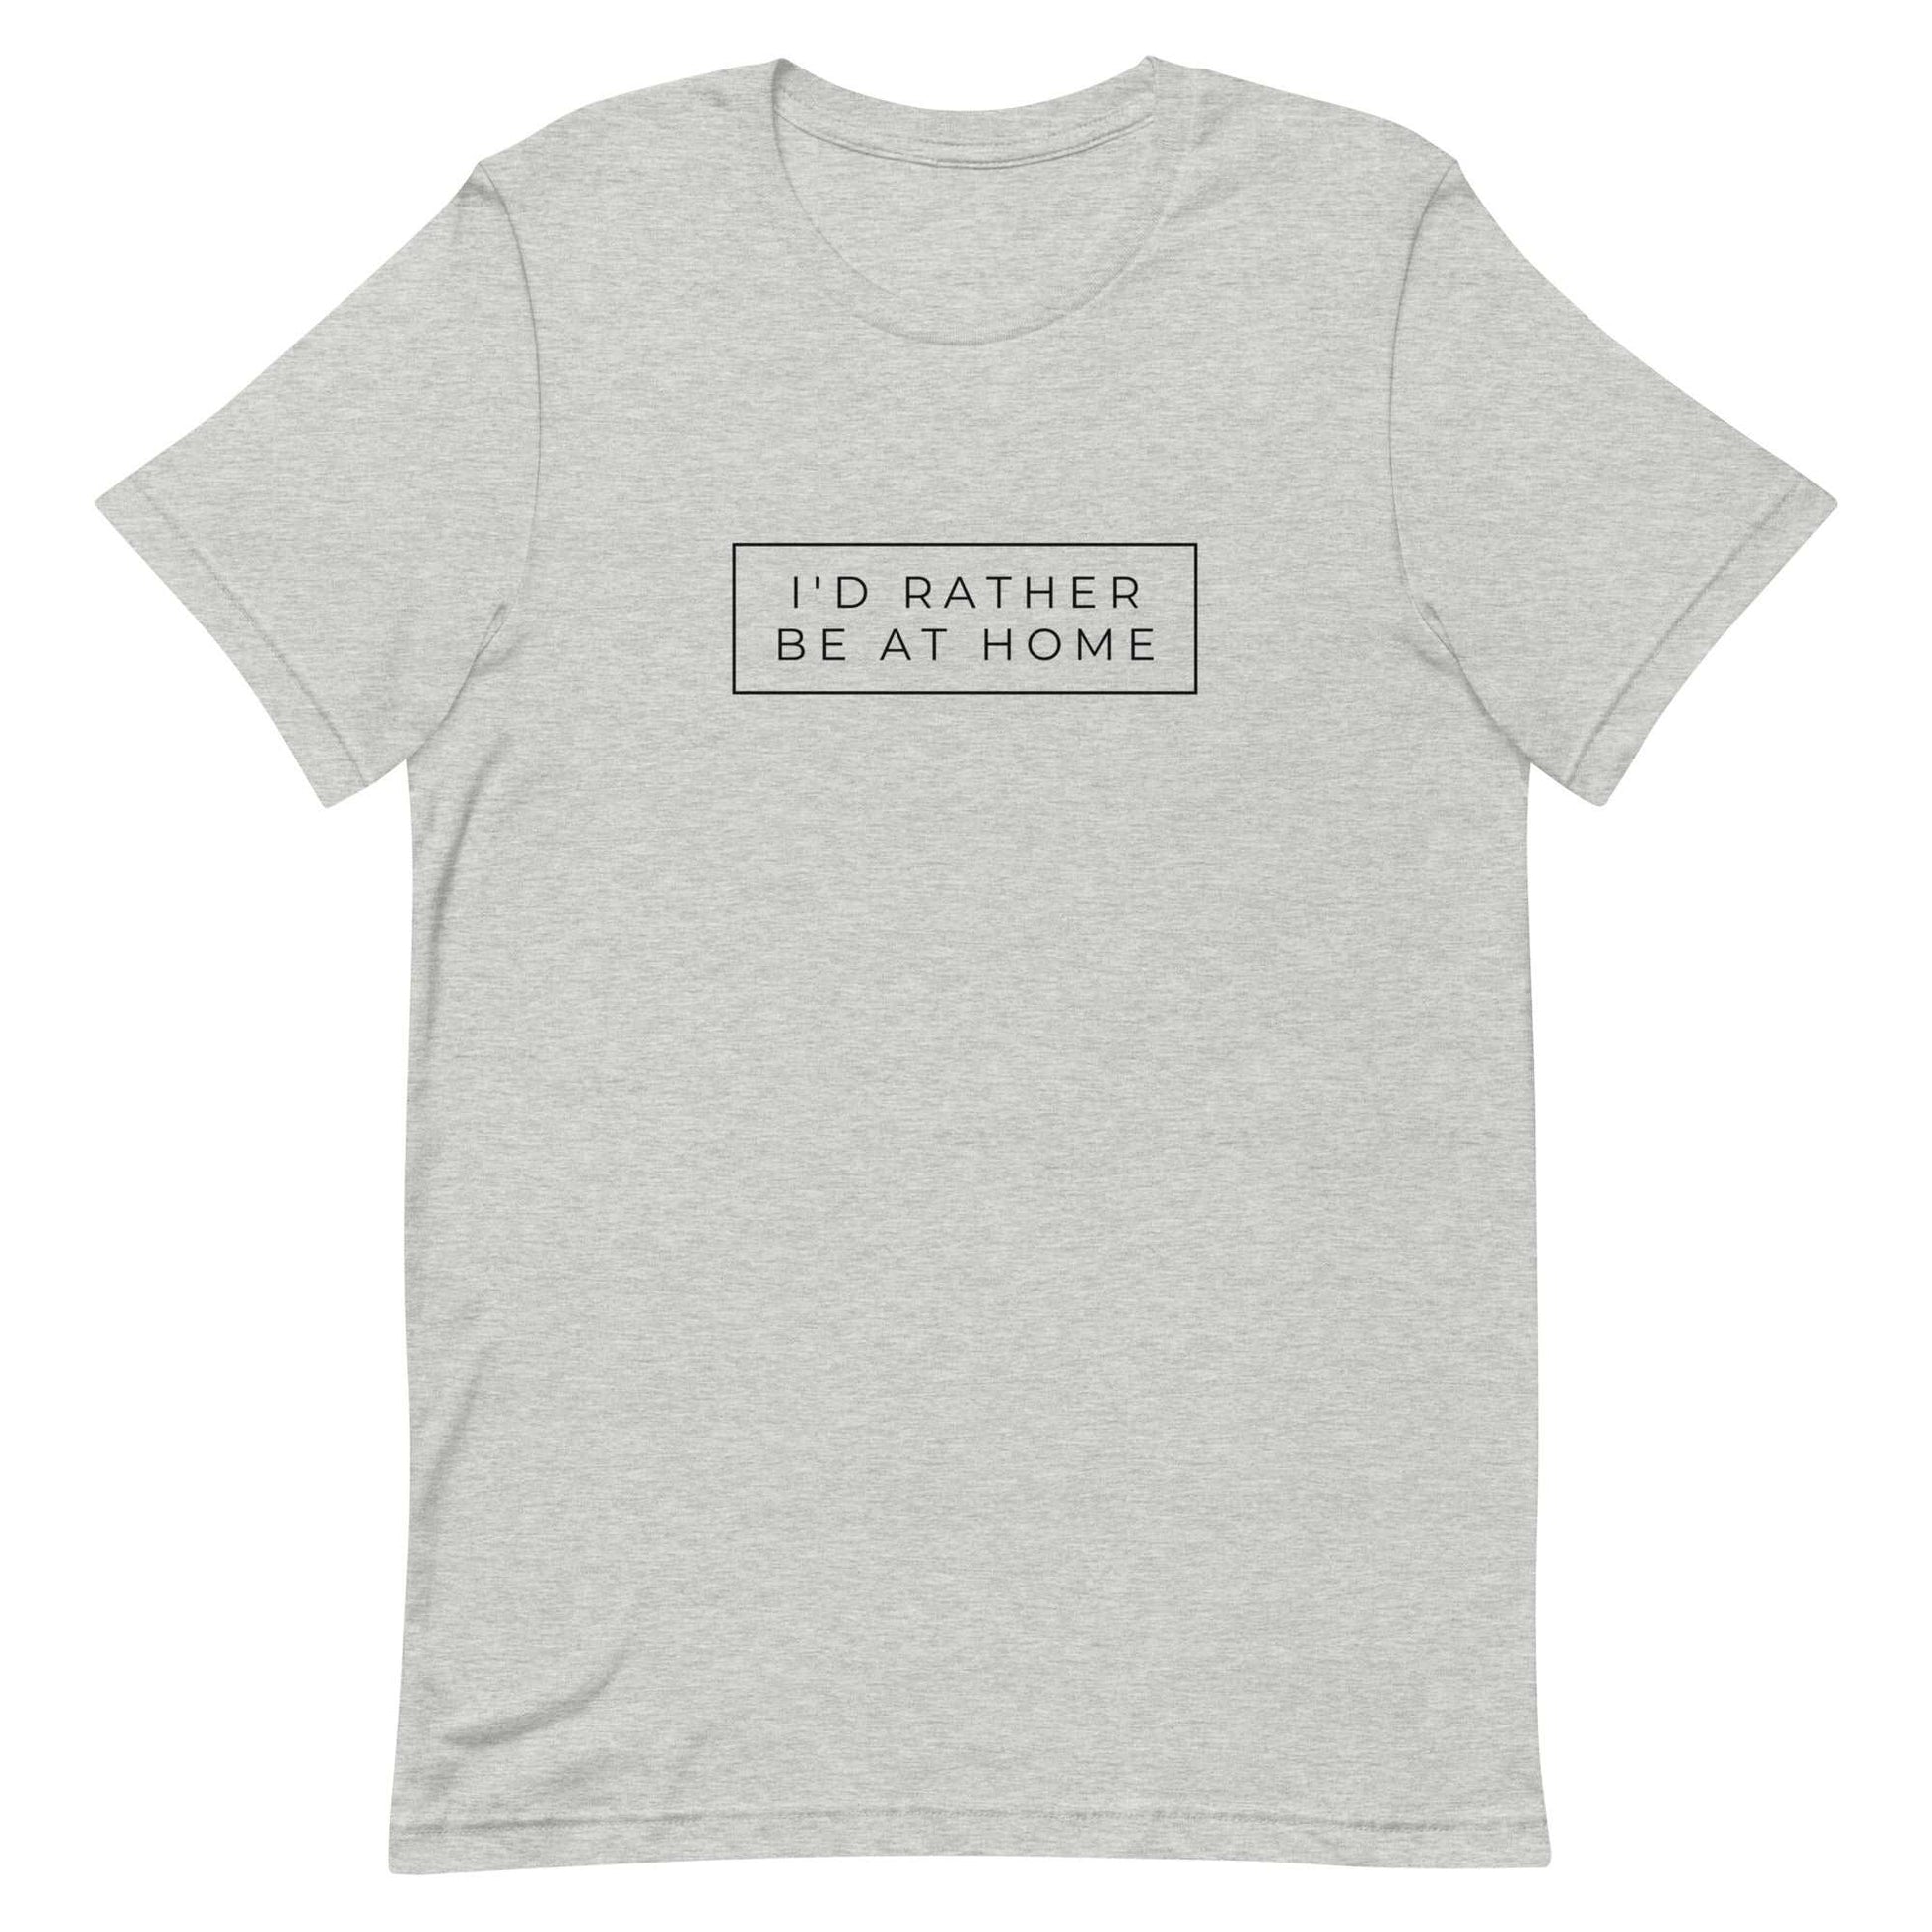 At Home Graphic t-shirt